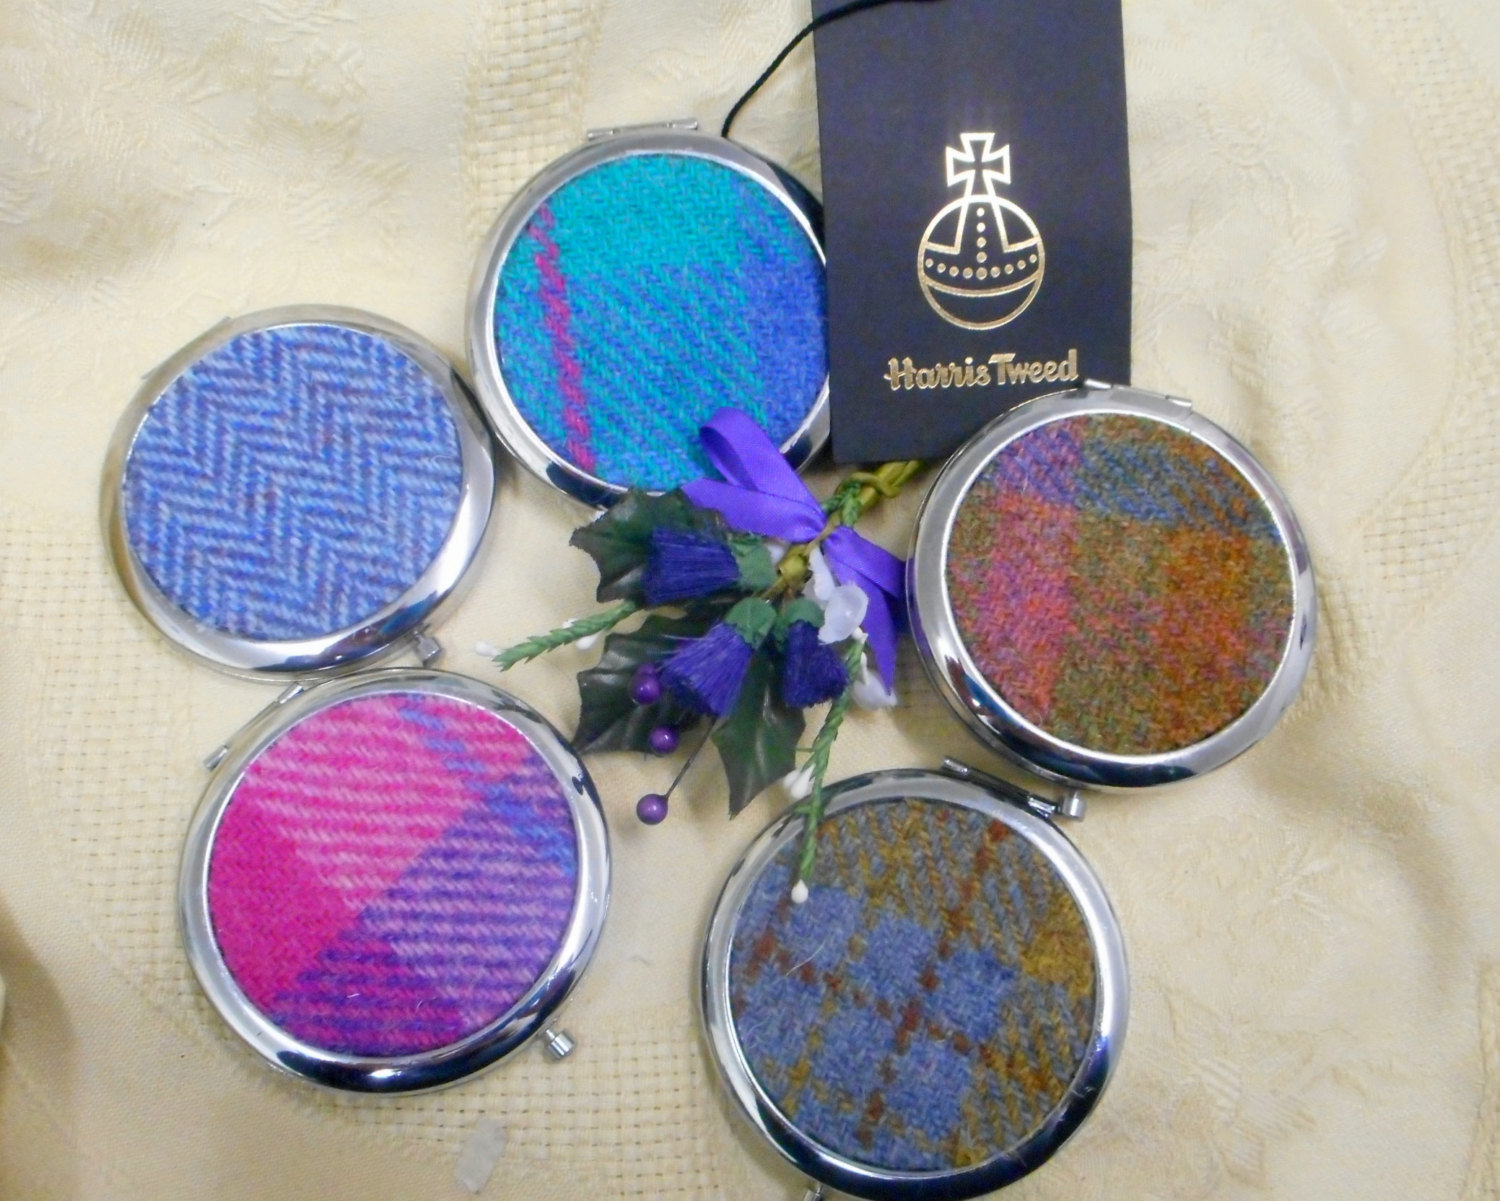 Compact Mirror Pink and purple Harris Tweed Scottish womens gift, handbag or pocket accessory, round silver plated made in Scotland UK